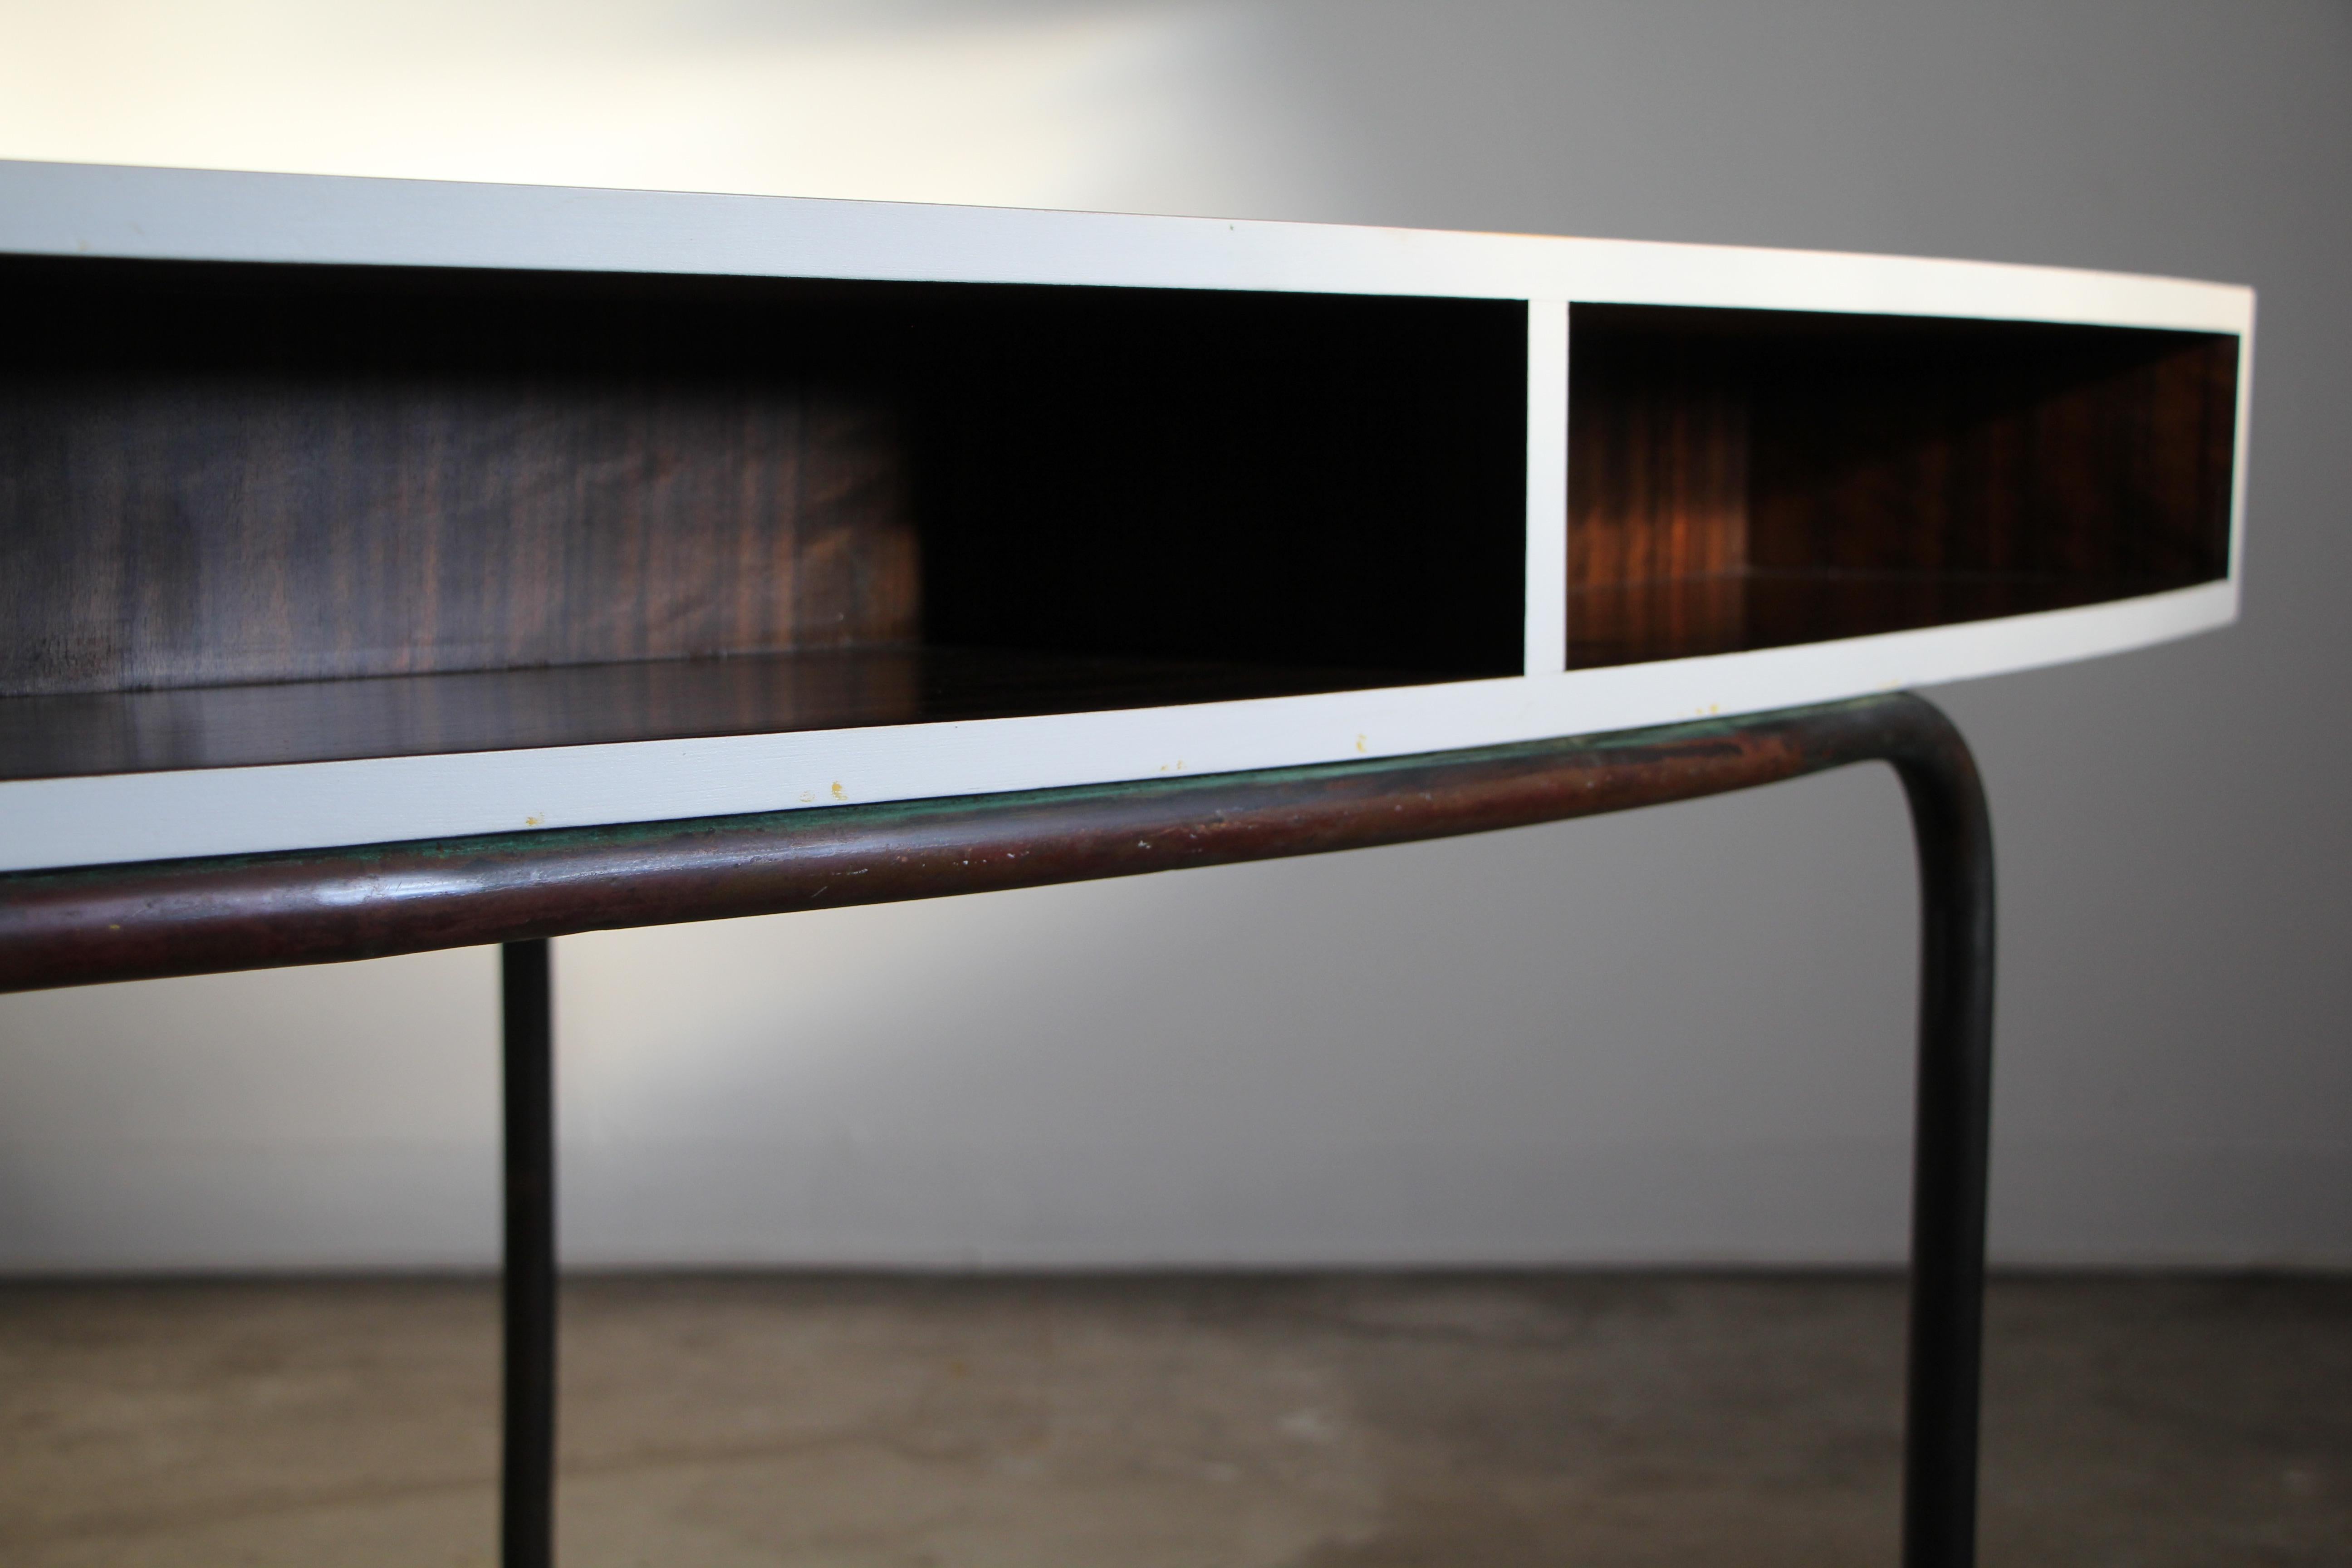 Serge Chermayeff One-of-a-Kind Curved Desk from the BBC Building 1930s For Sale 3